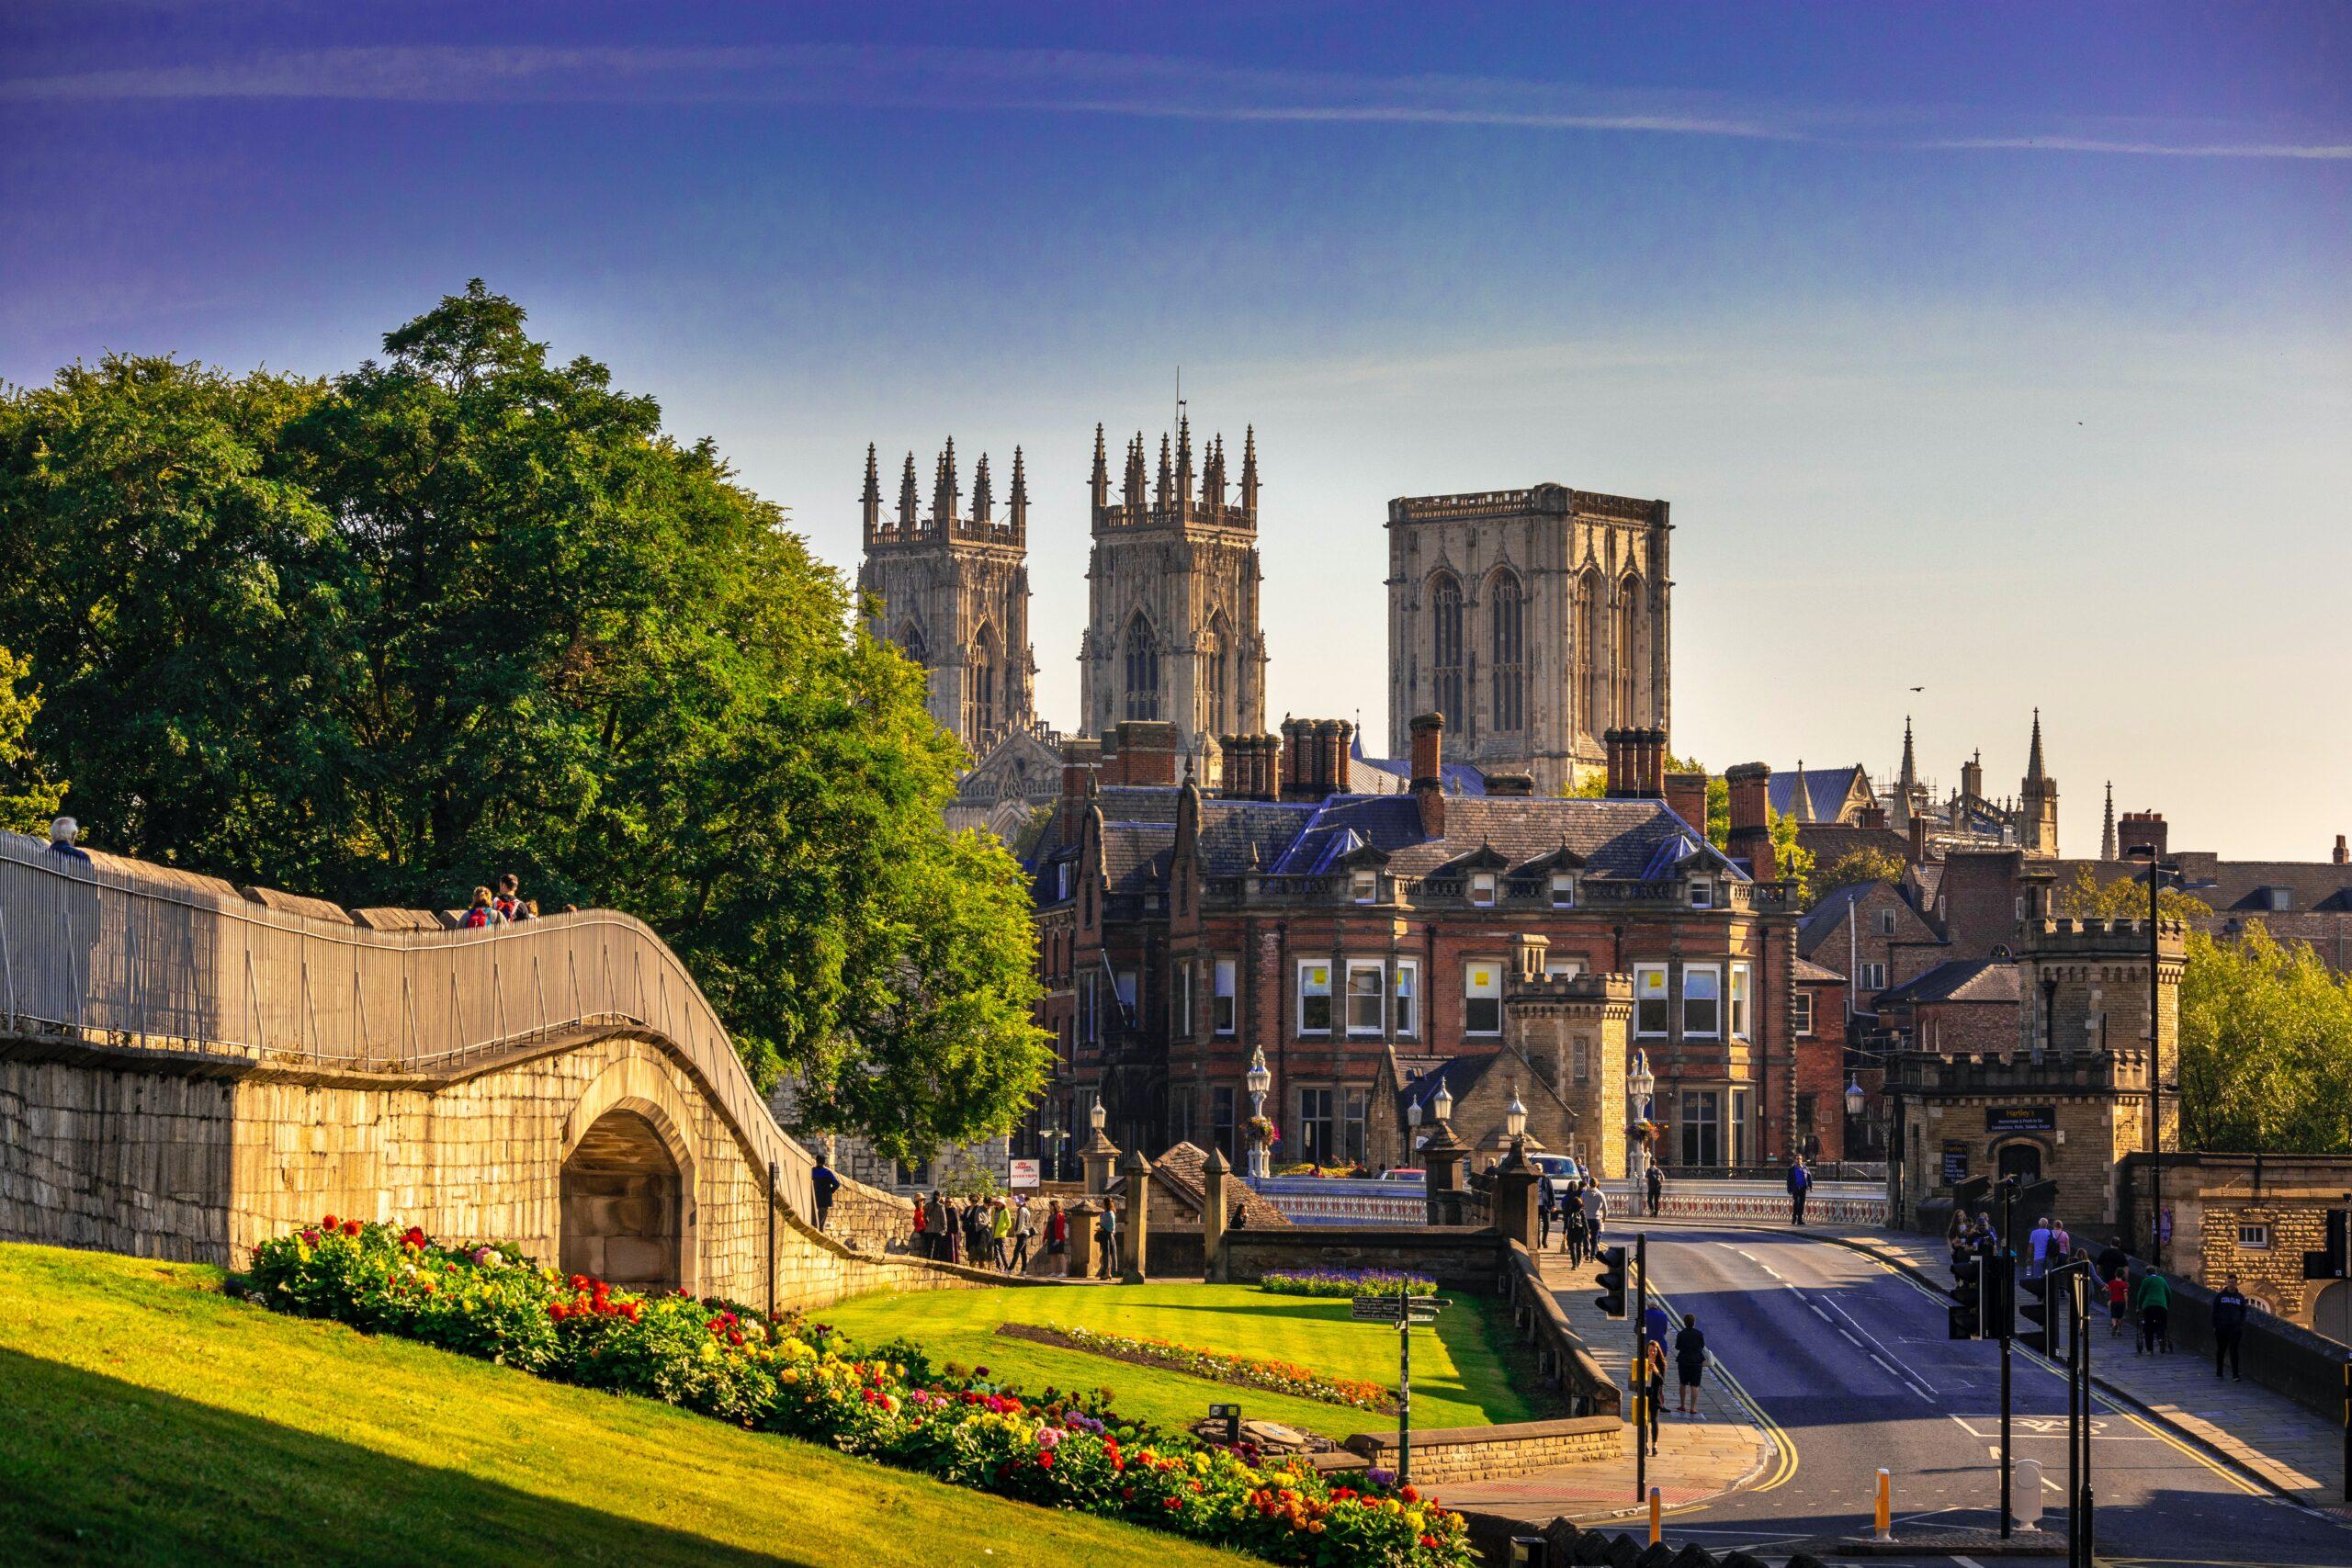 View of York Minster and park